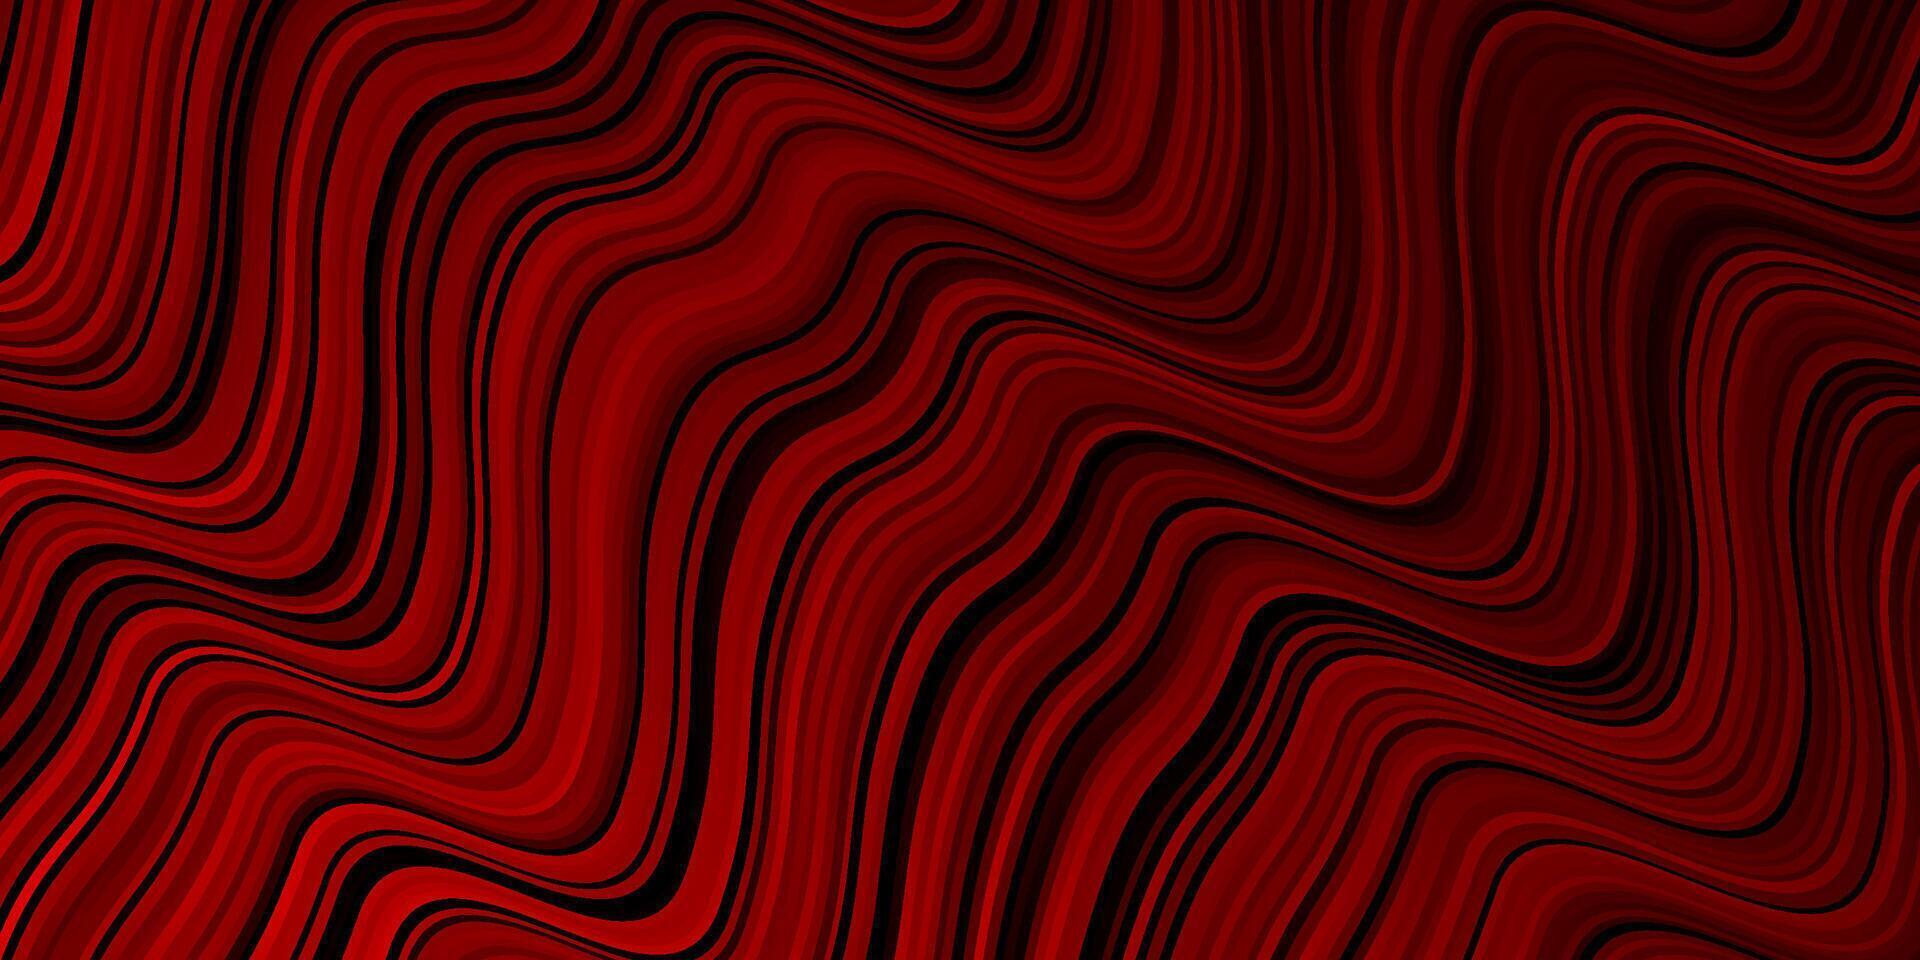 Dark Red vector backdrop with curved lines.